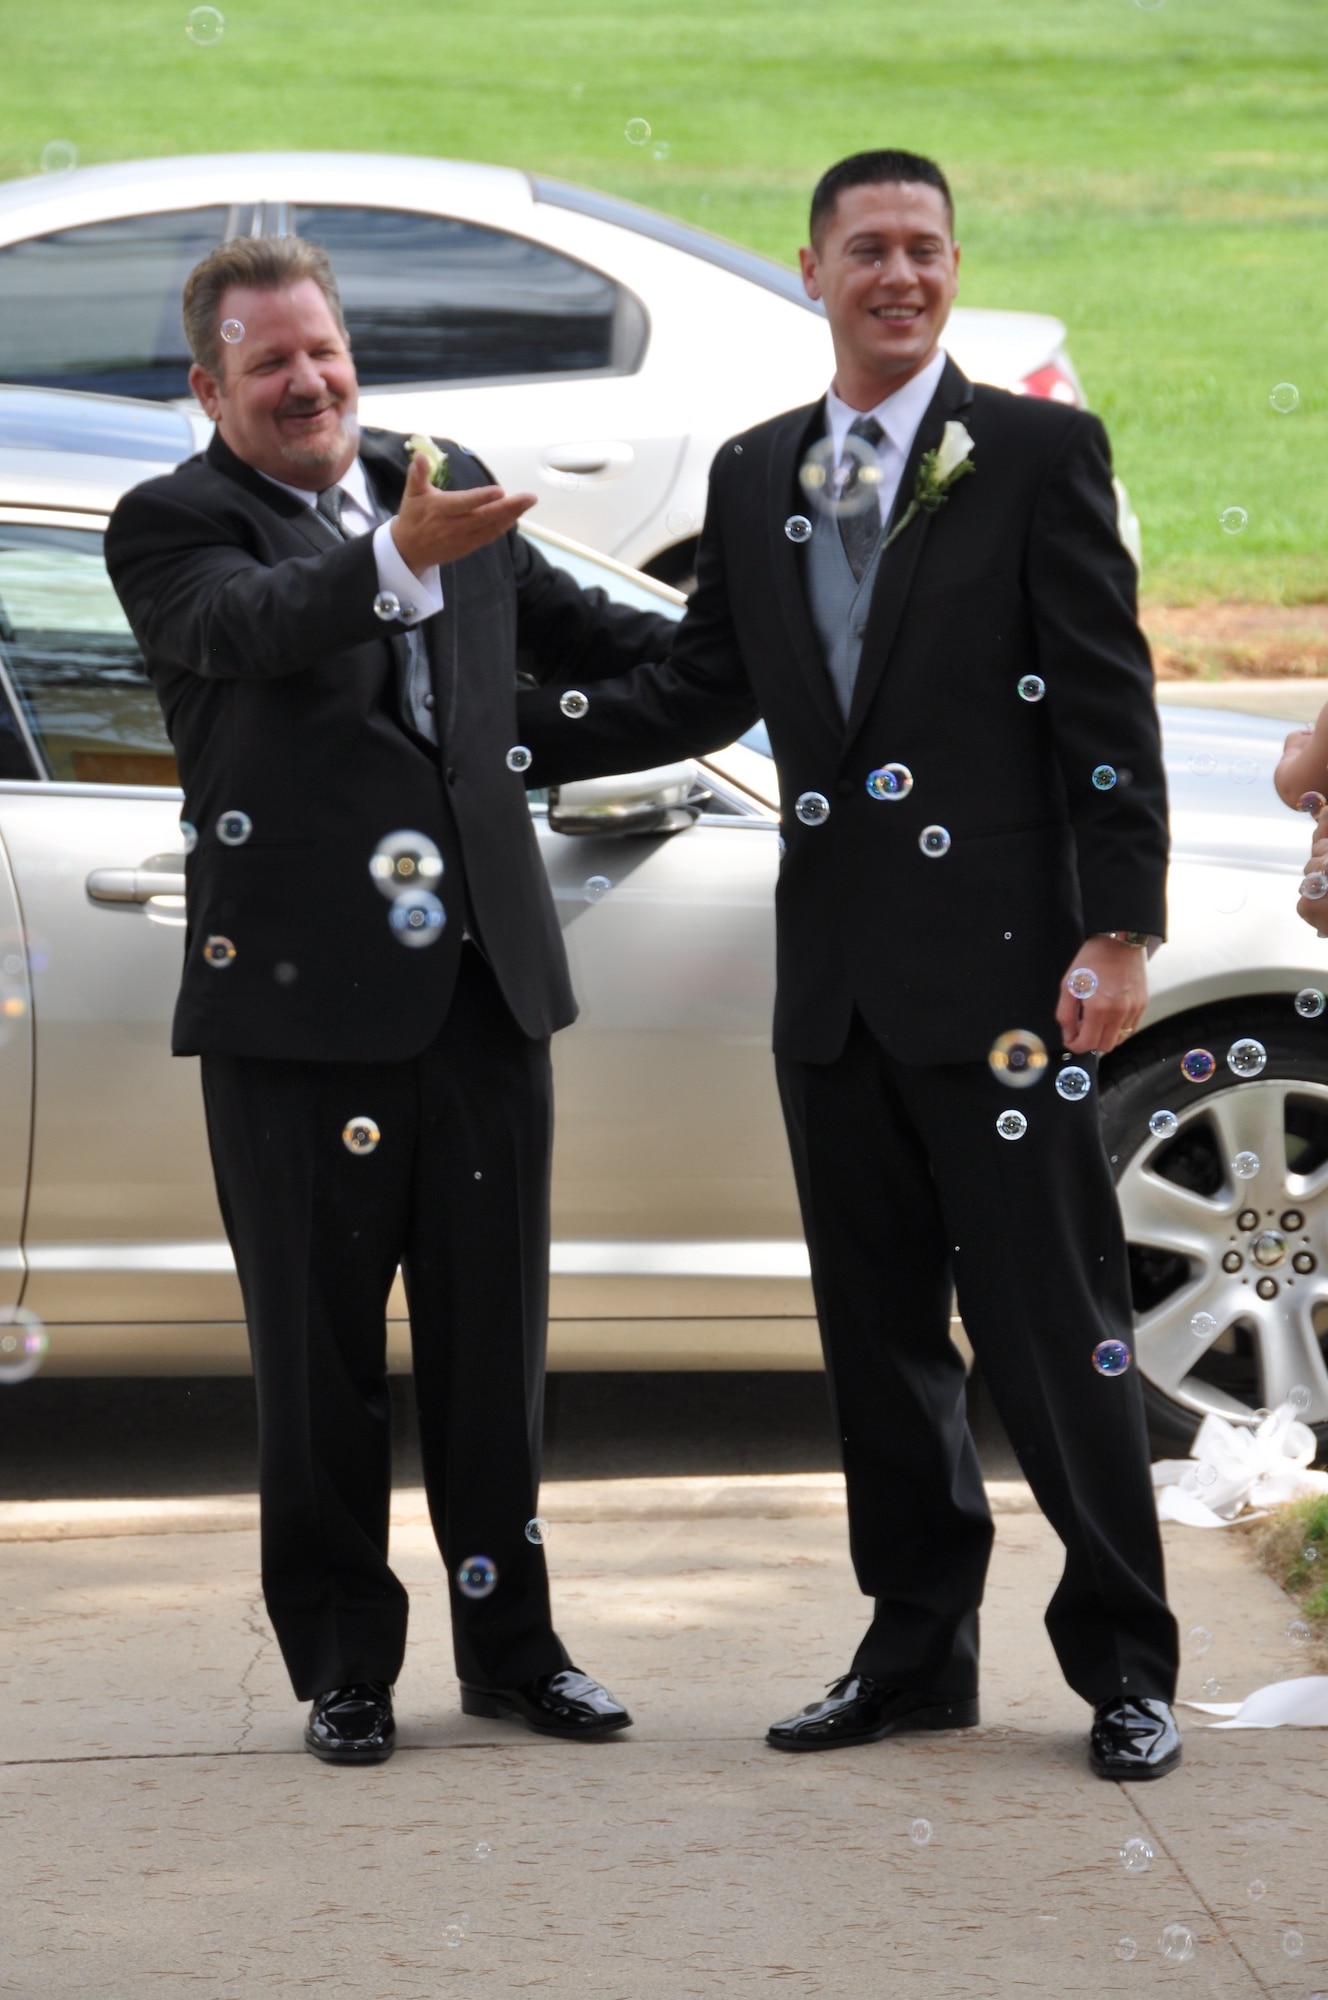 Marvin Tucker, emergency manager, 452nd Air Mobility Wing (left), and his new husband, Joshua Delgado, stop outside the historic March Air Reserve Base chapel, Aug. 3, 2013, to respond to the cheering guests after the couple became the first same-sex couple to be married at March ARB.